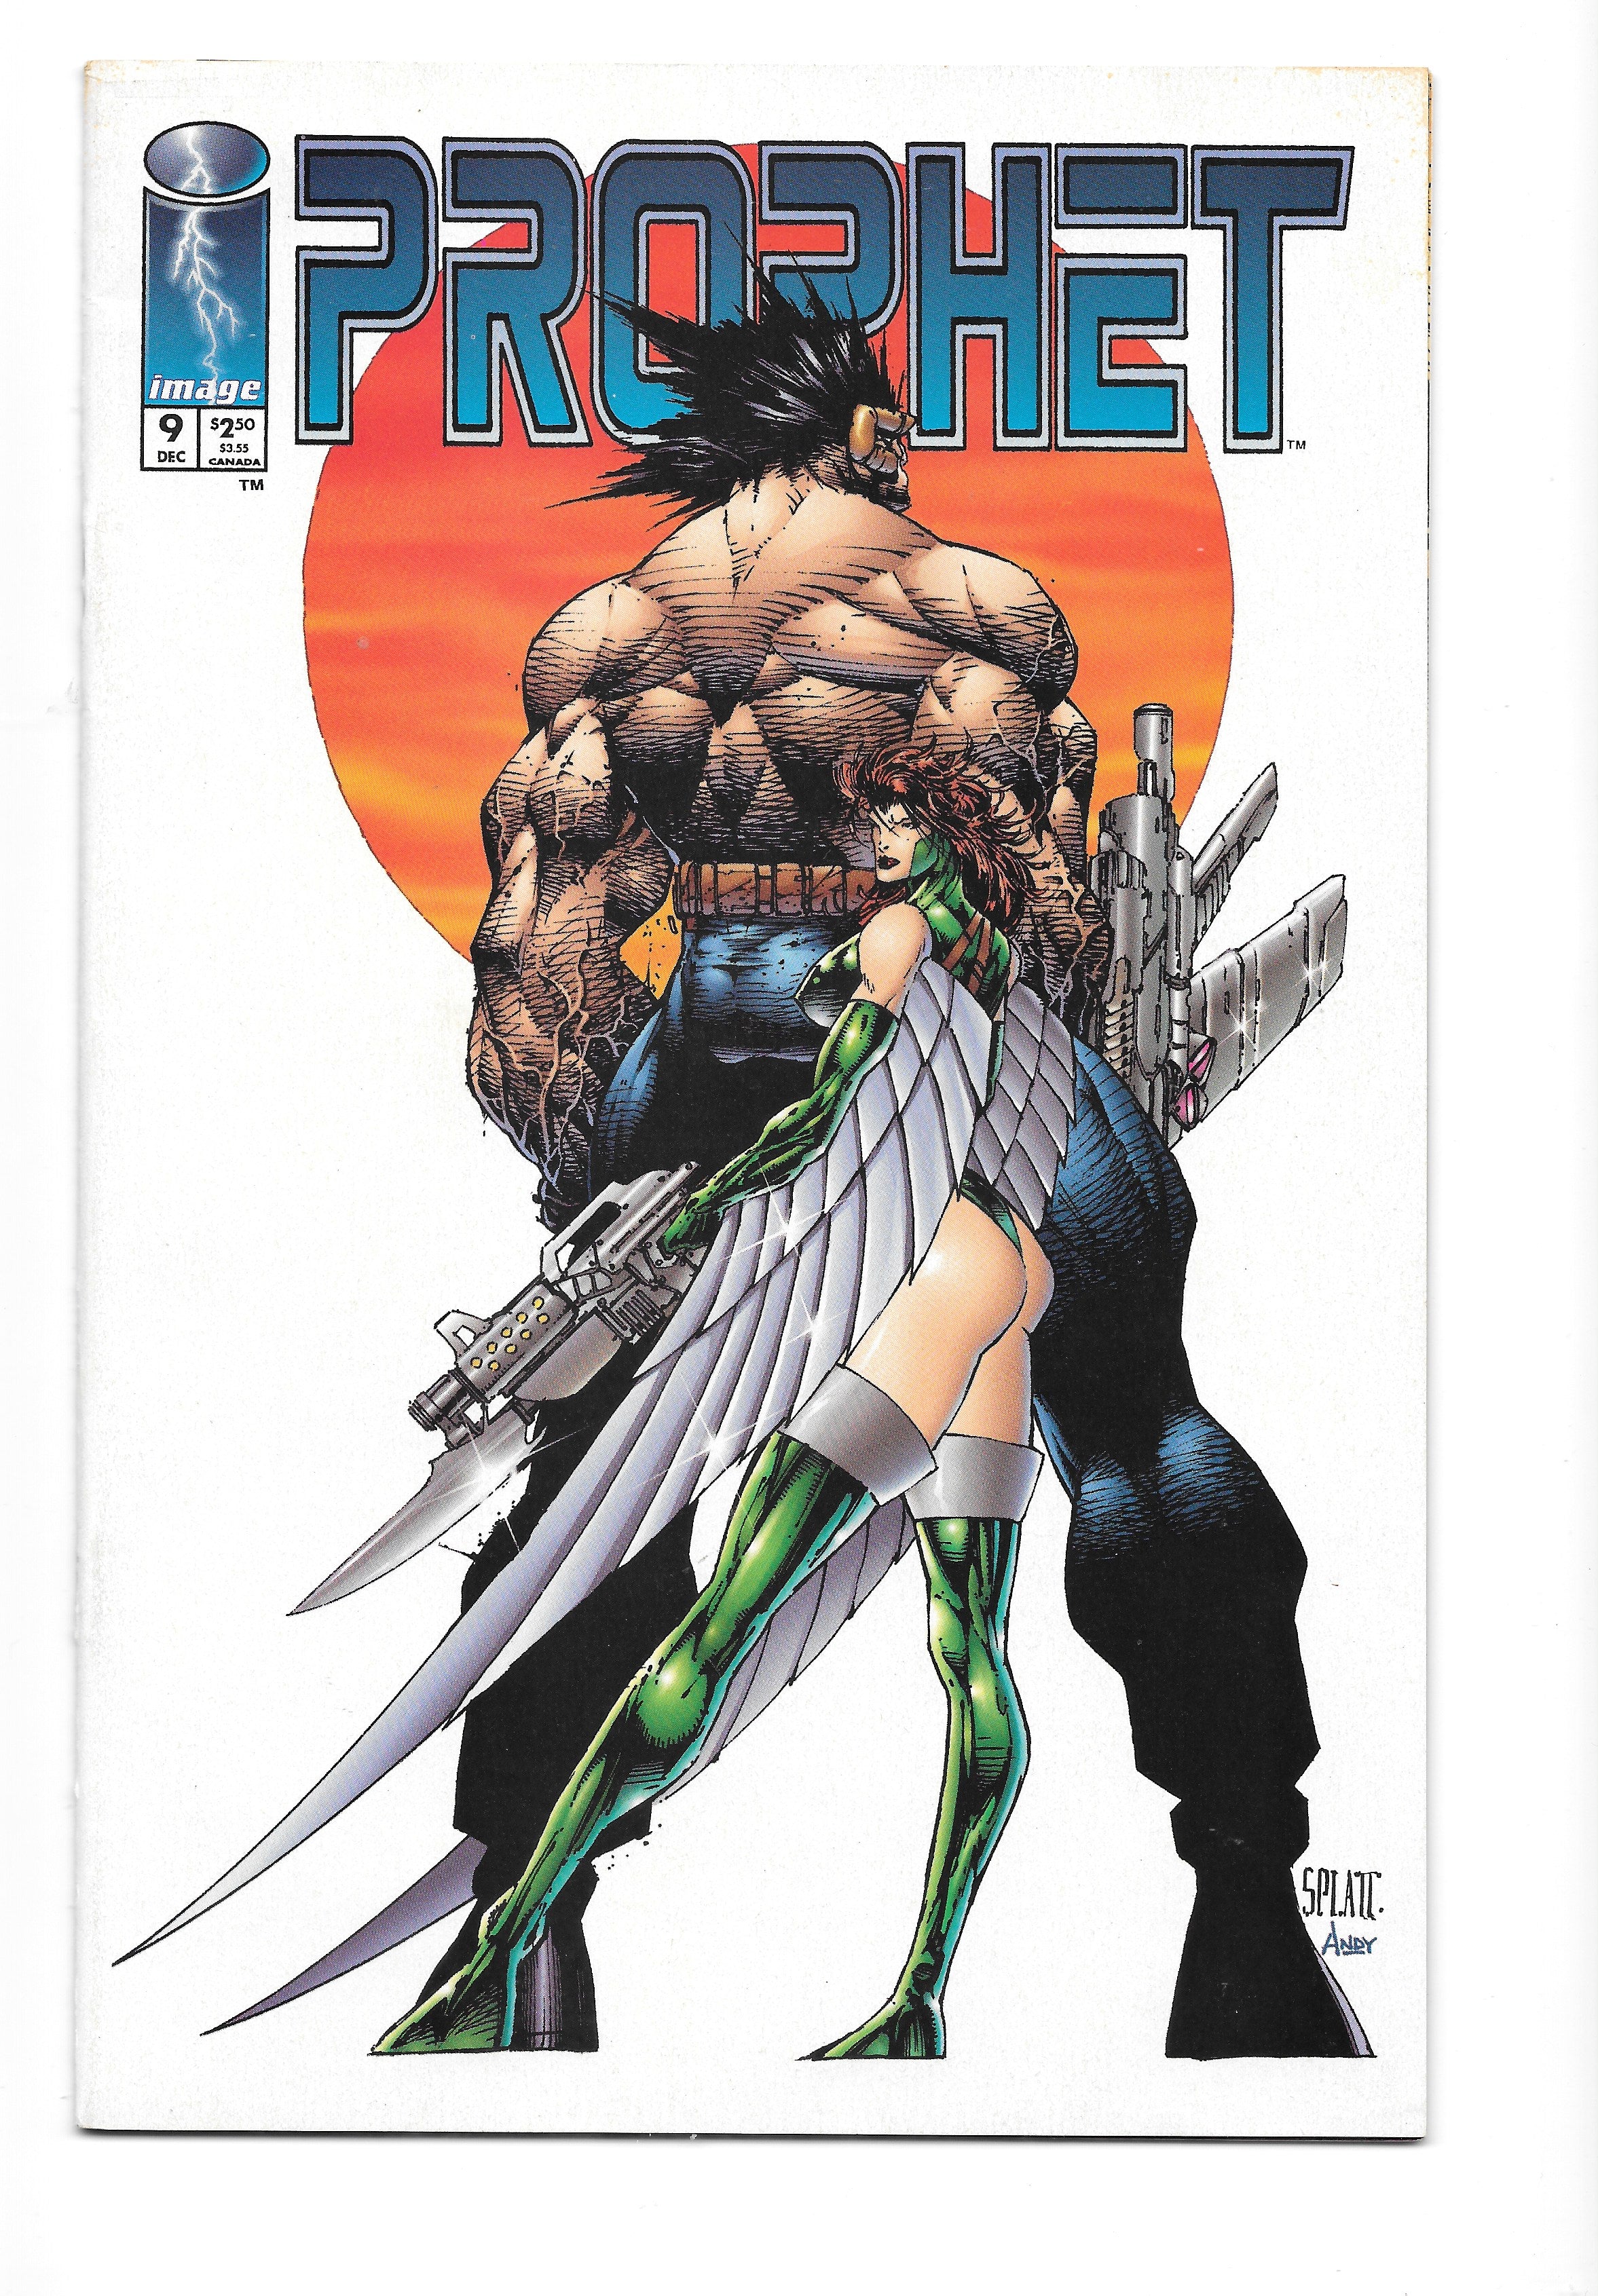 Photo of Prophet, Vol. 1 (1994)  Iss 9   Comic sold by Stronghold Collectibles